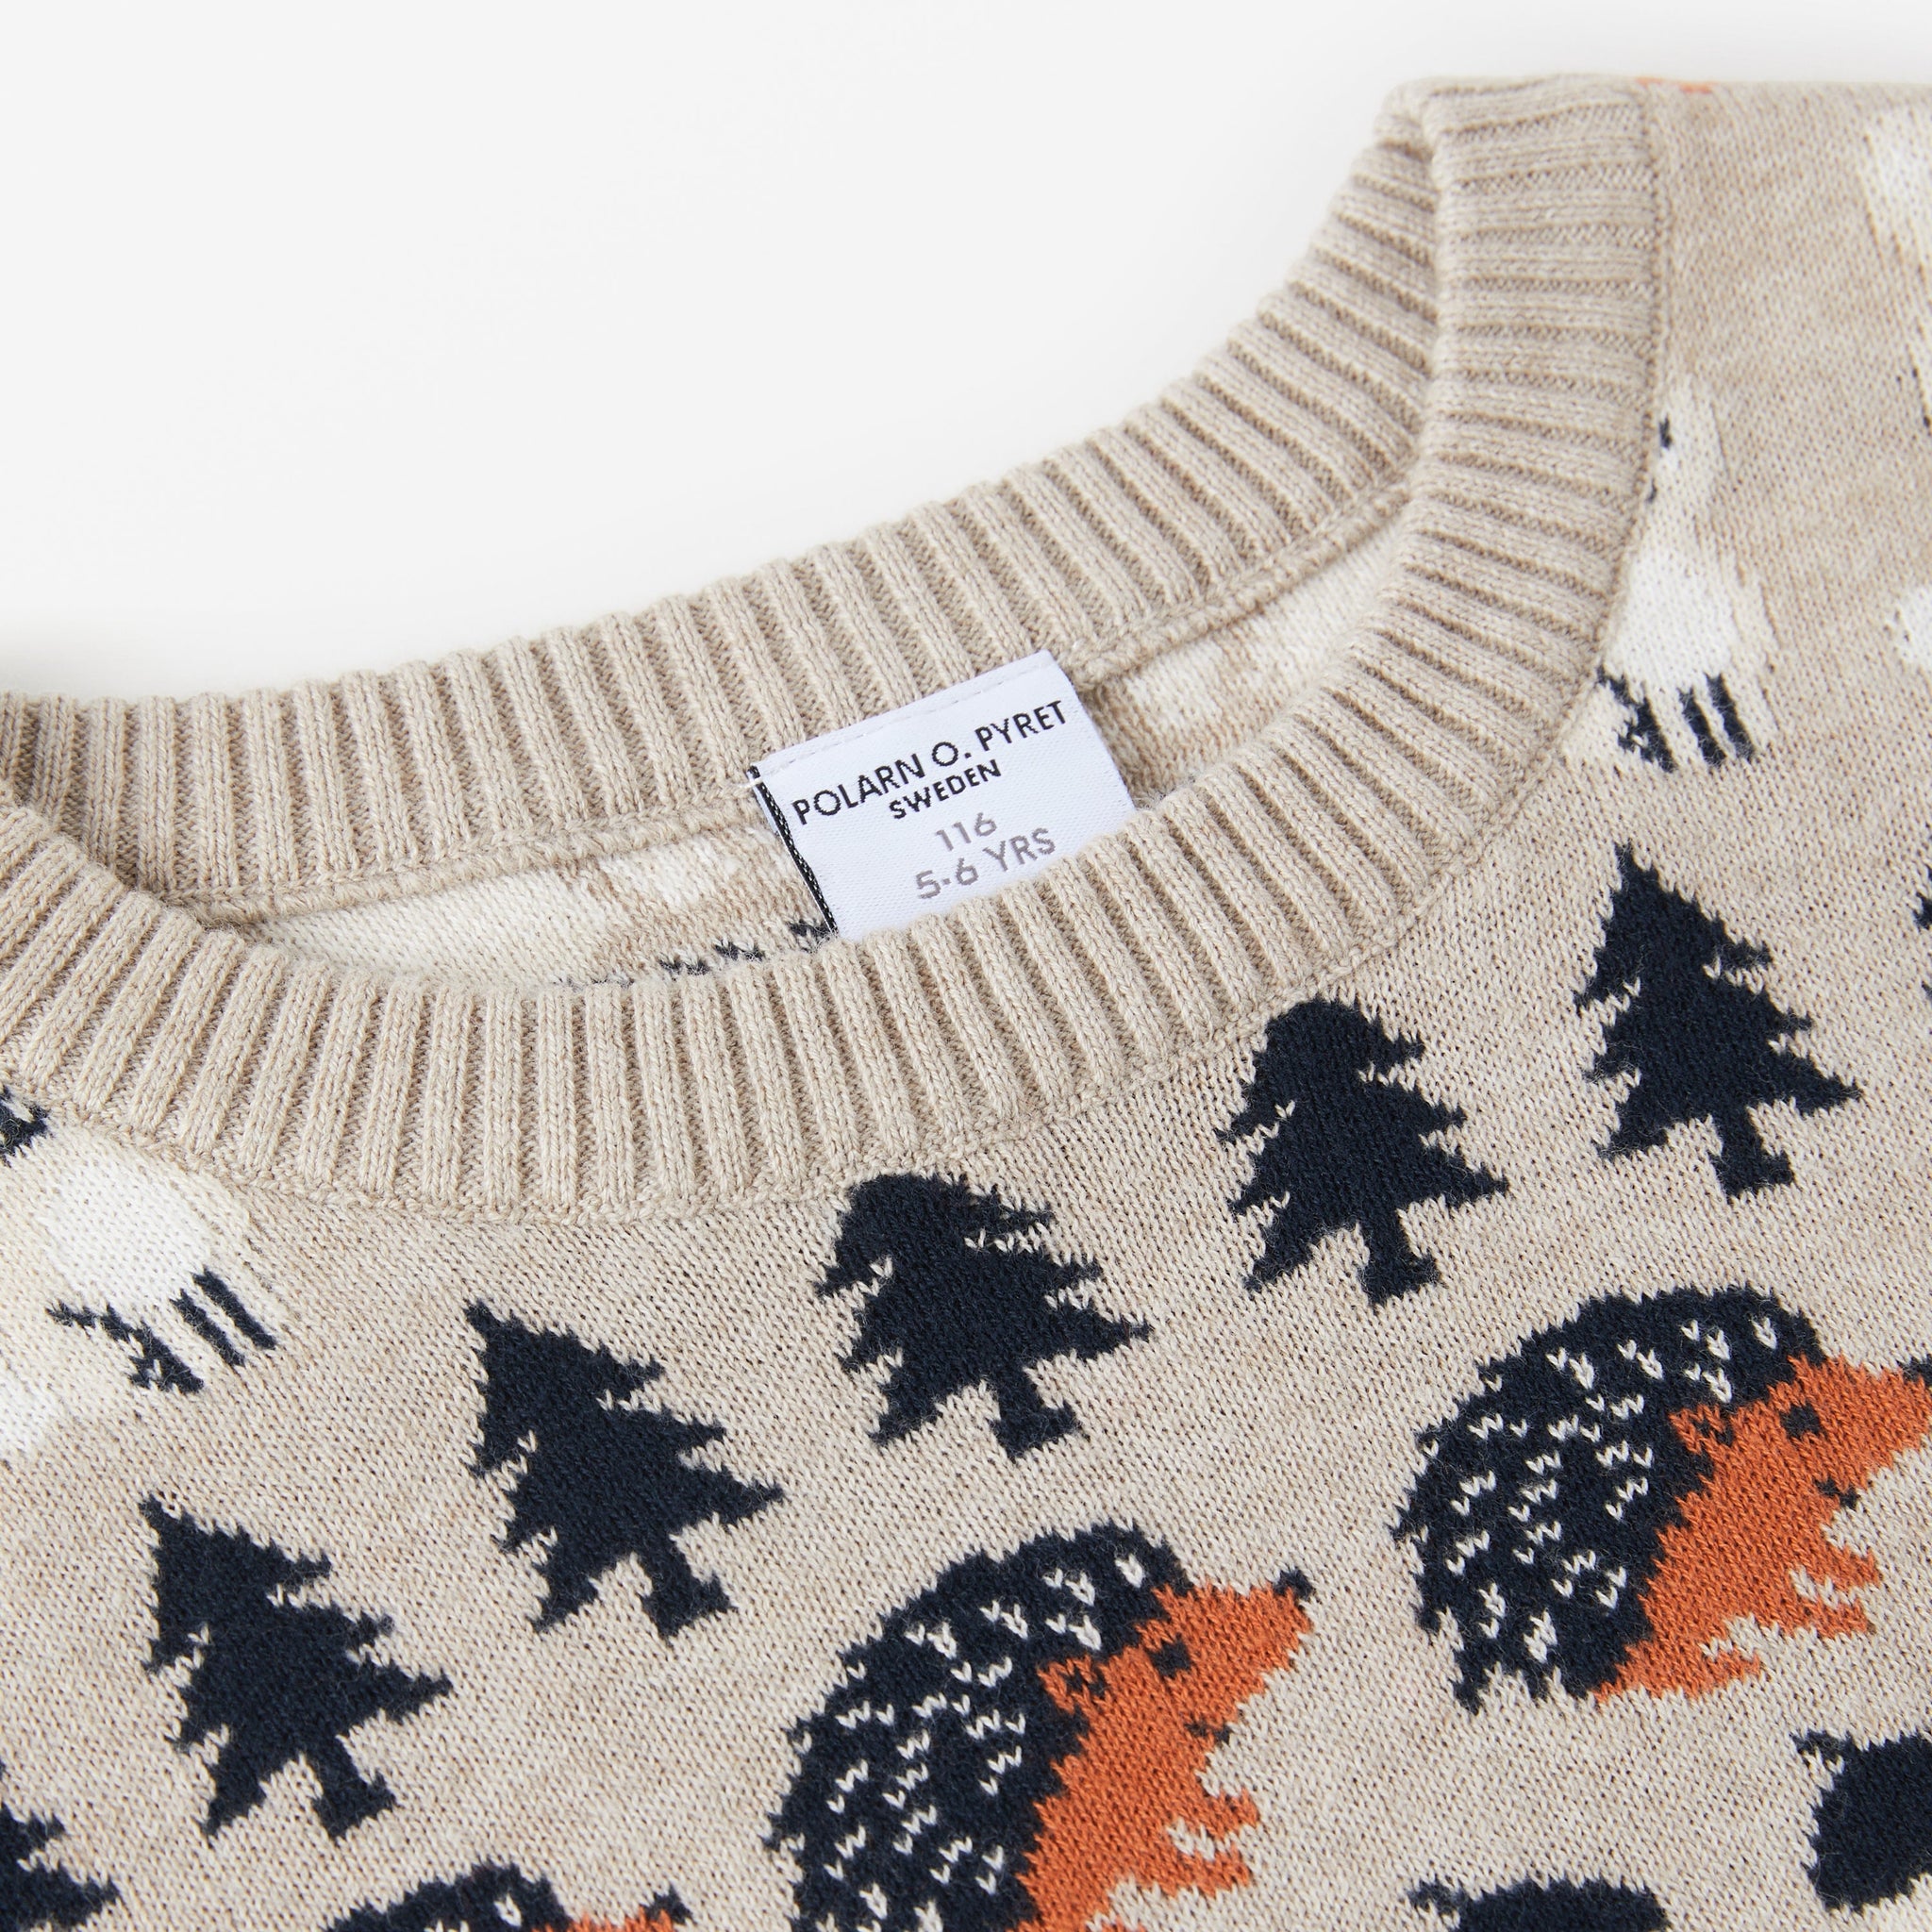 Organic Cotton Nordic Animal Kids Jumper from the Polarn O. Pyret kidswear collection. Ethically produced kids clothing.